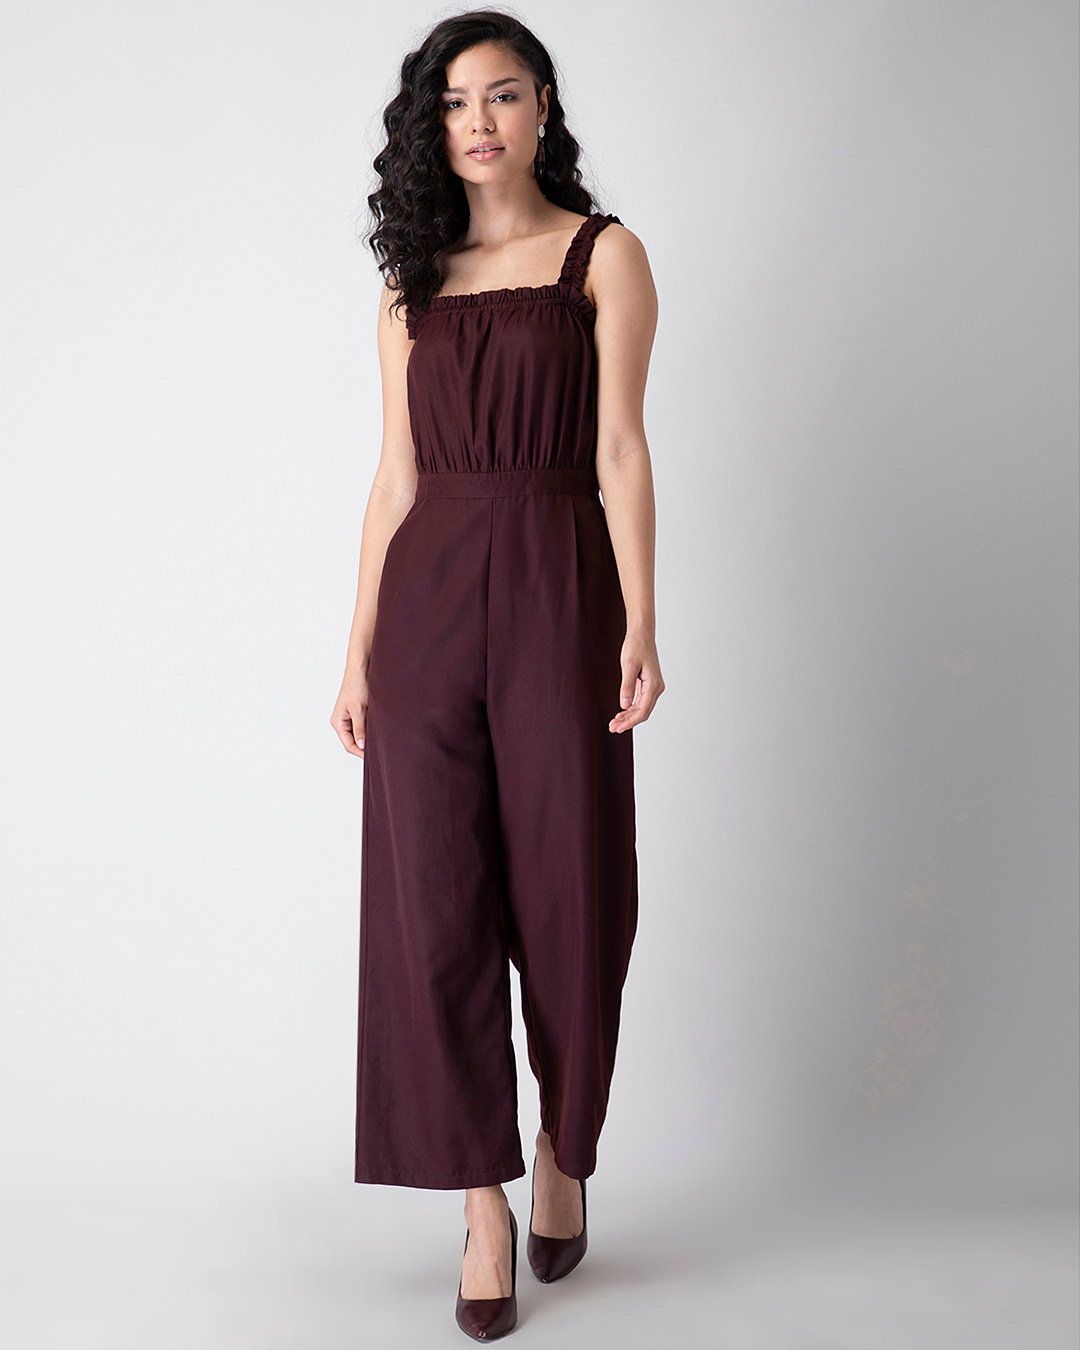 Buy Women Green Velour Side Cut Out Jumpsuit - LAST OF THE BEST Online  India - FabAlley